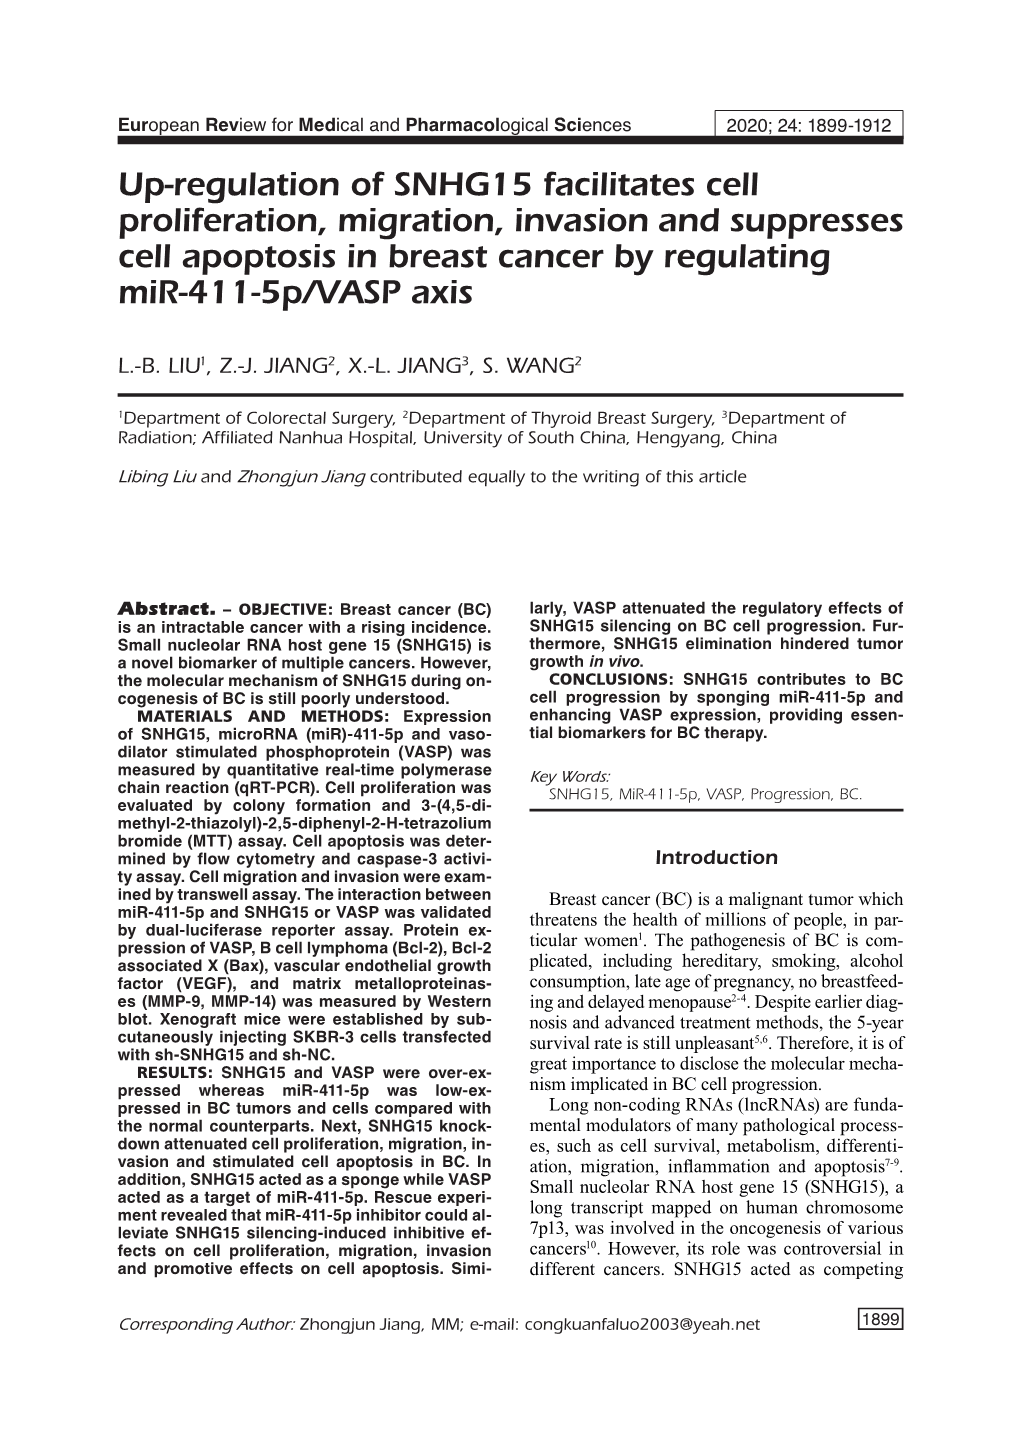 Up-Regulation of SNHG15 Facilitates Cell Proliferation, Migration, Invasion and Suppresses Cell Apoptosis in Breast Cancer by Regulating Mir-411-5P/VASP Axis